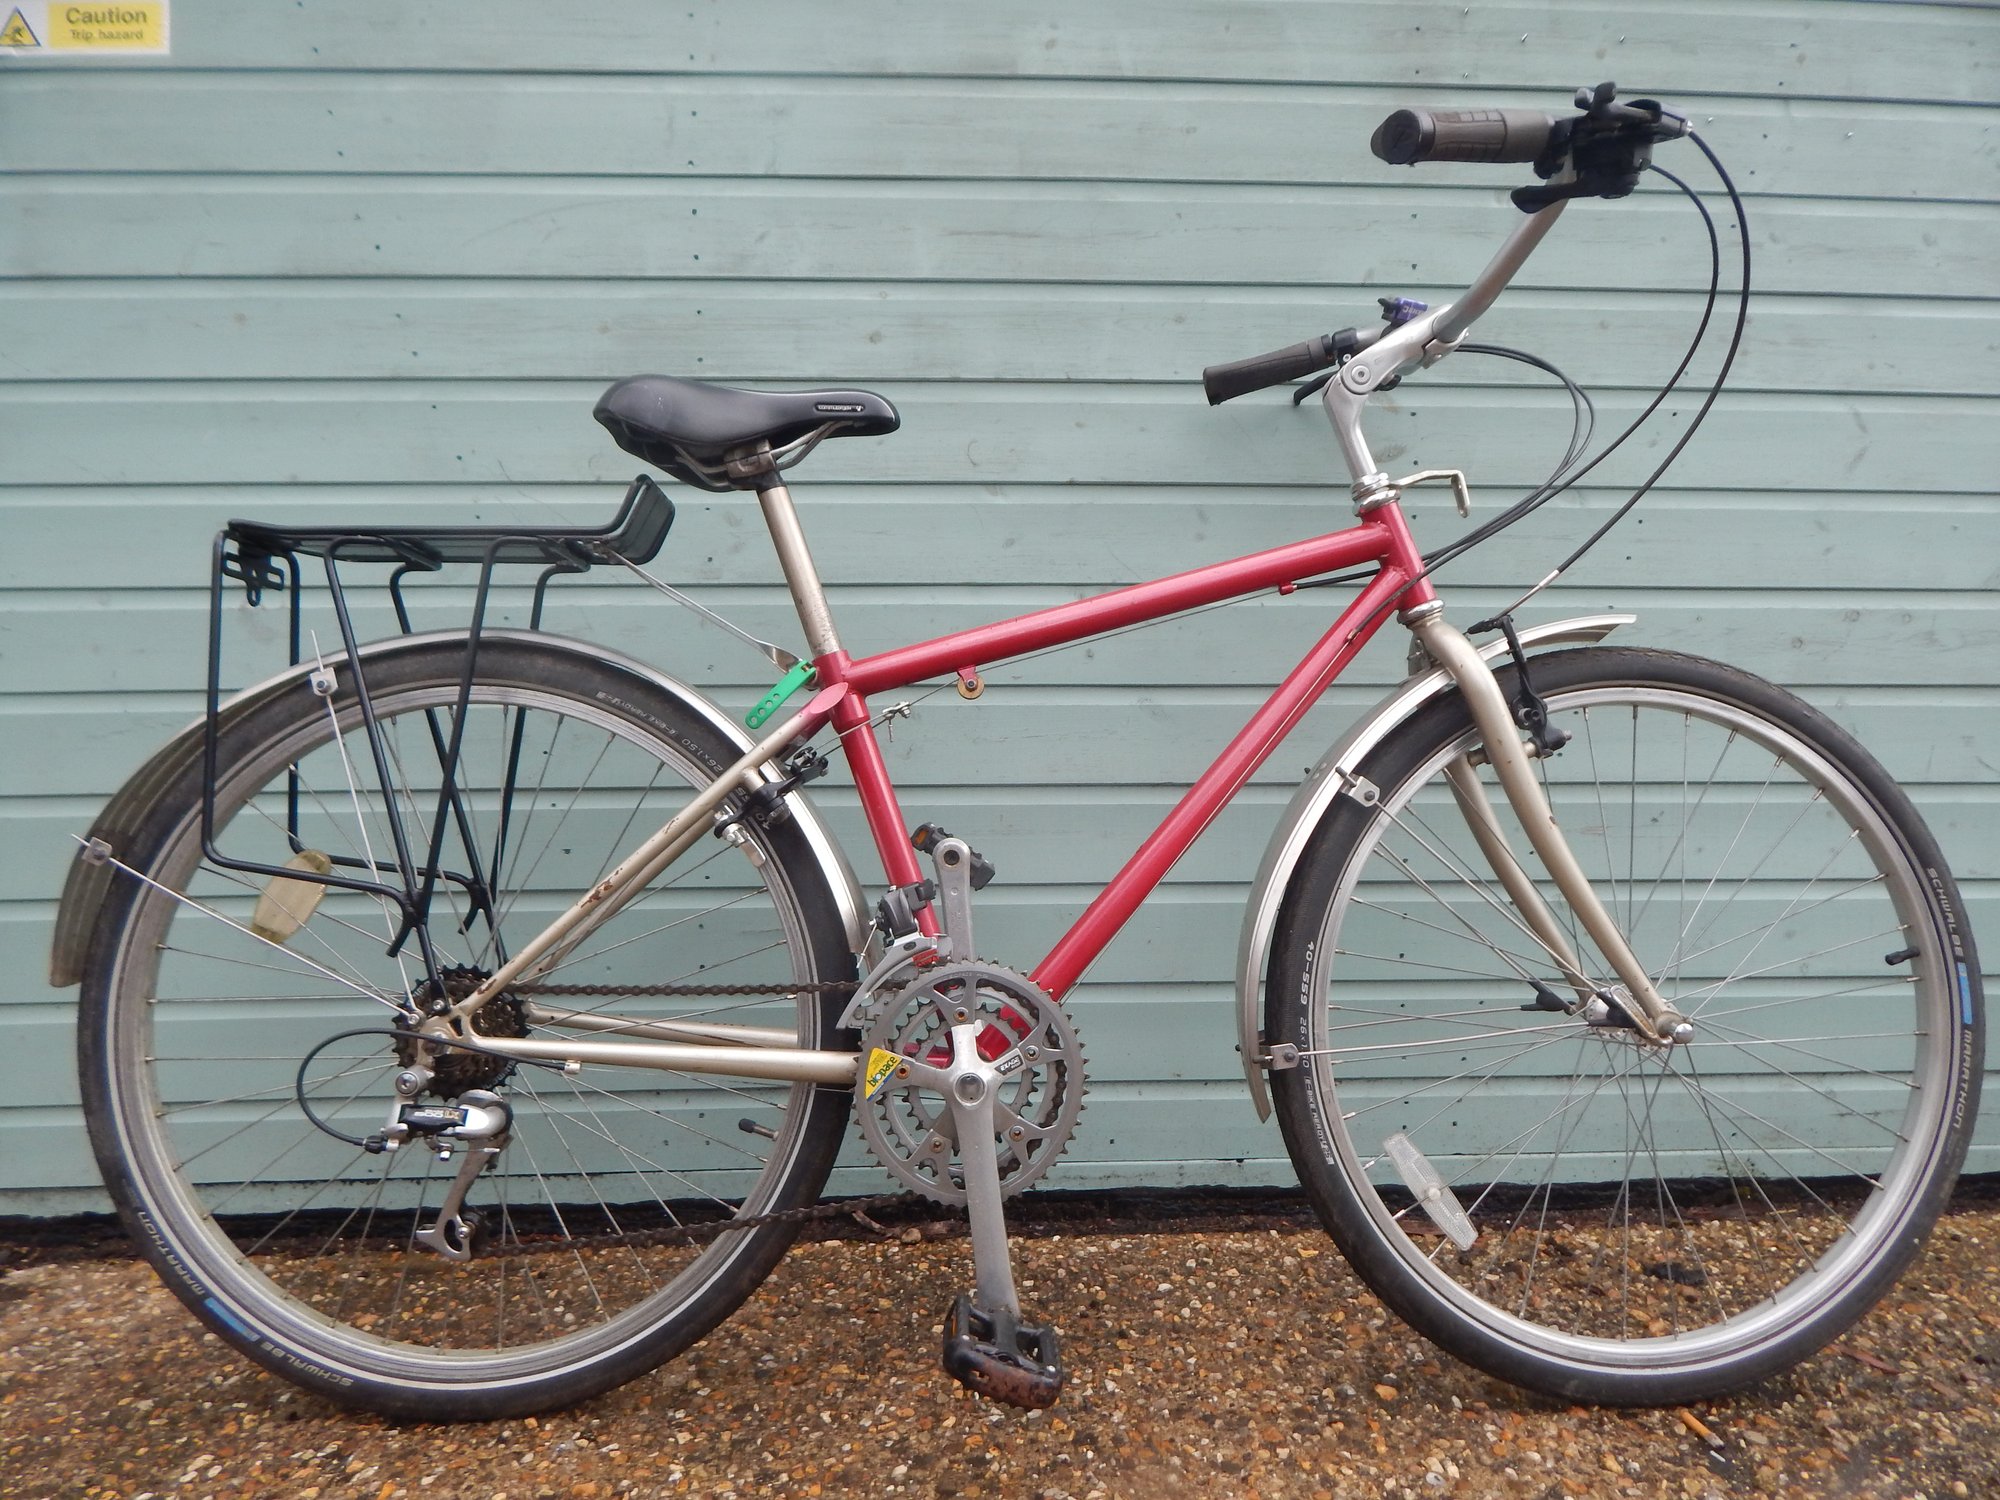 For sale red and gold MTB hybrid